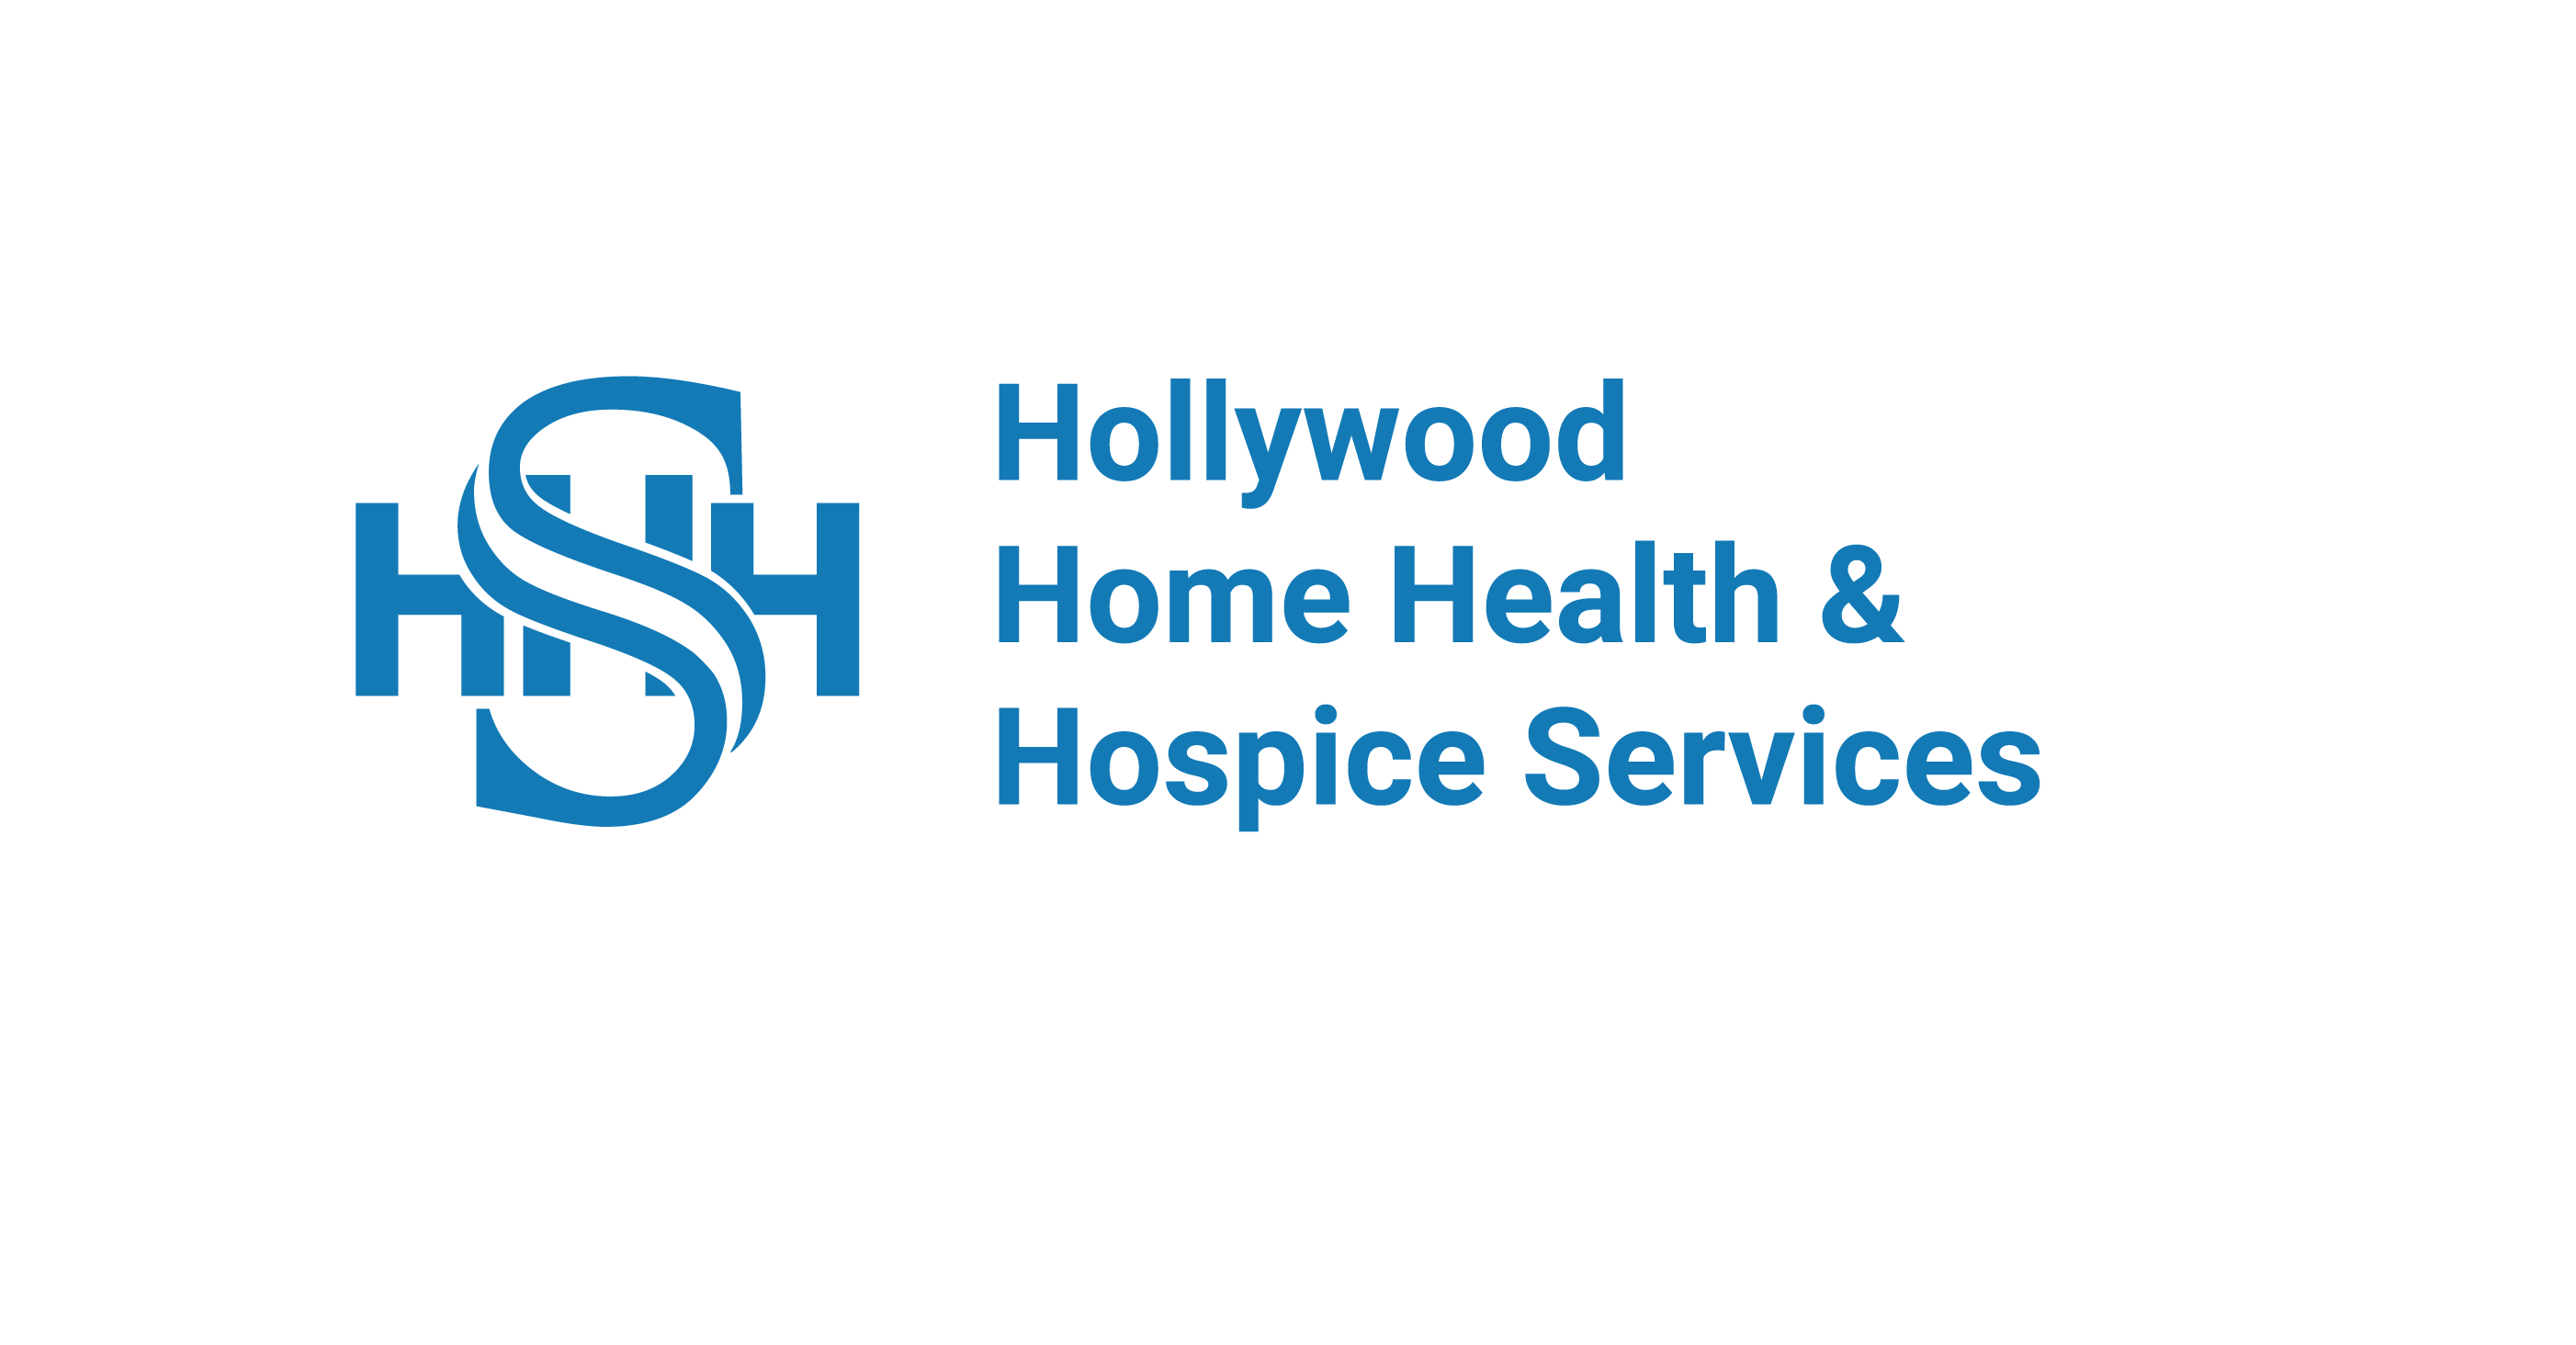 Hollywood Home Health & Hospice Services image